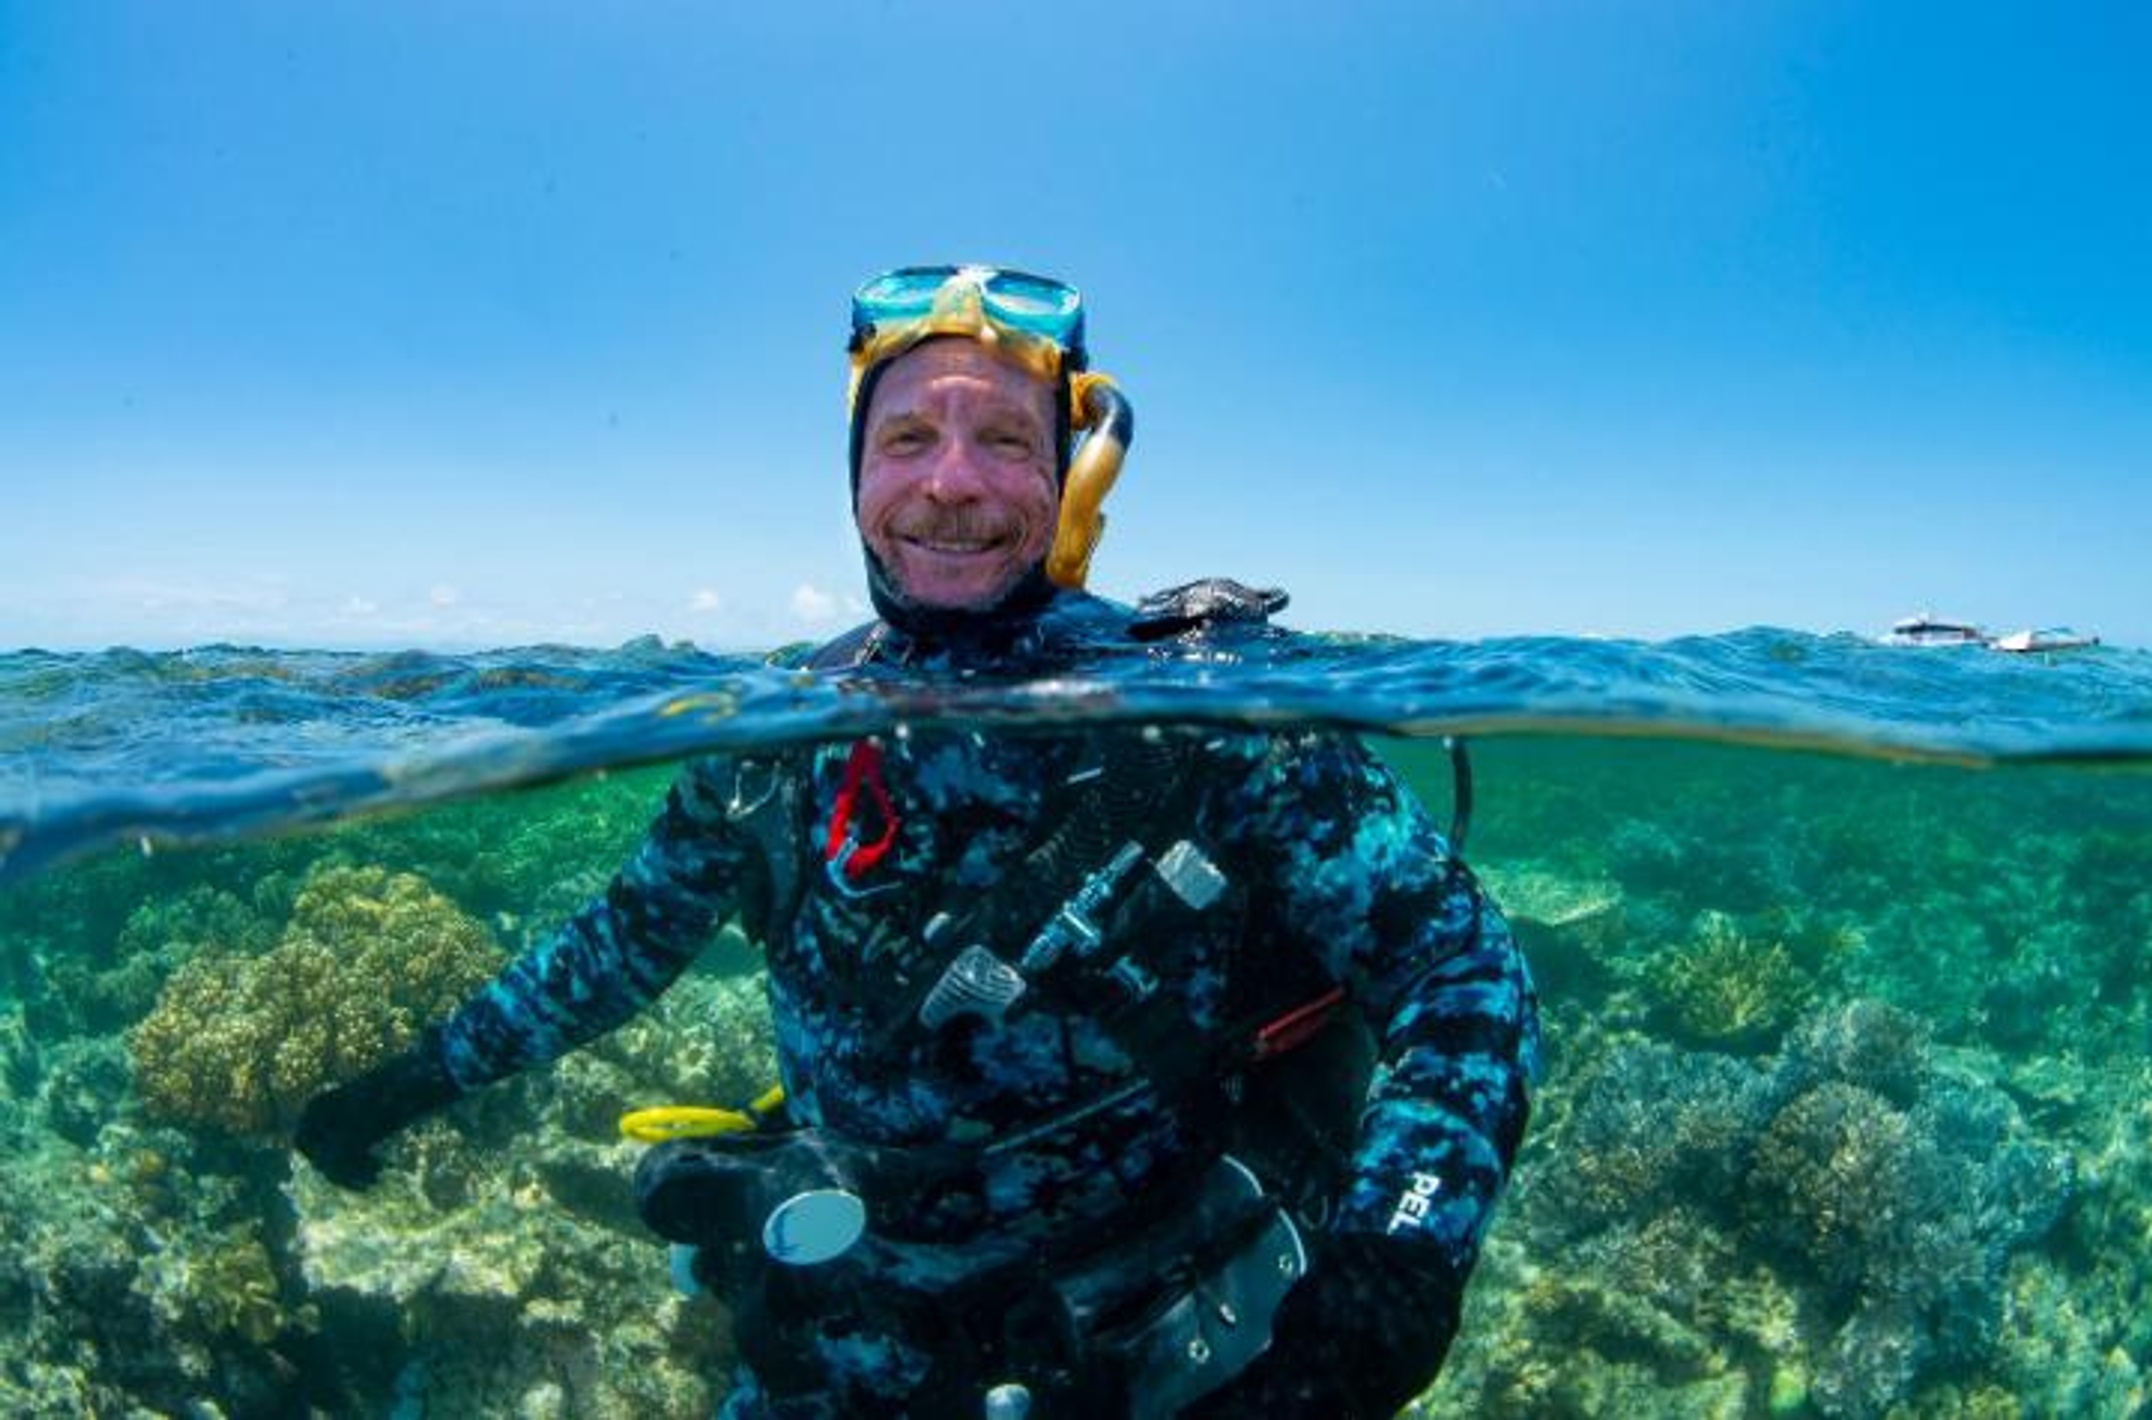 Scuba diver emerging from the ocean surrounded by coral reef